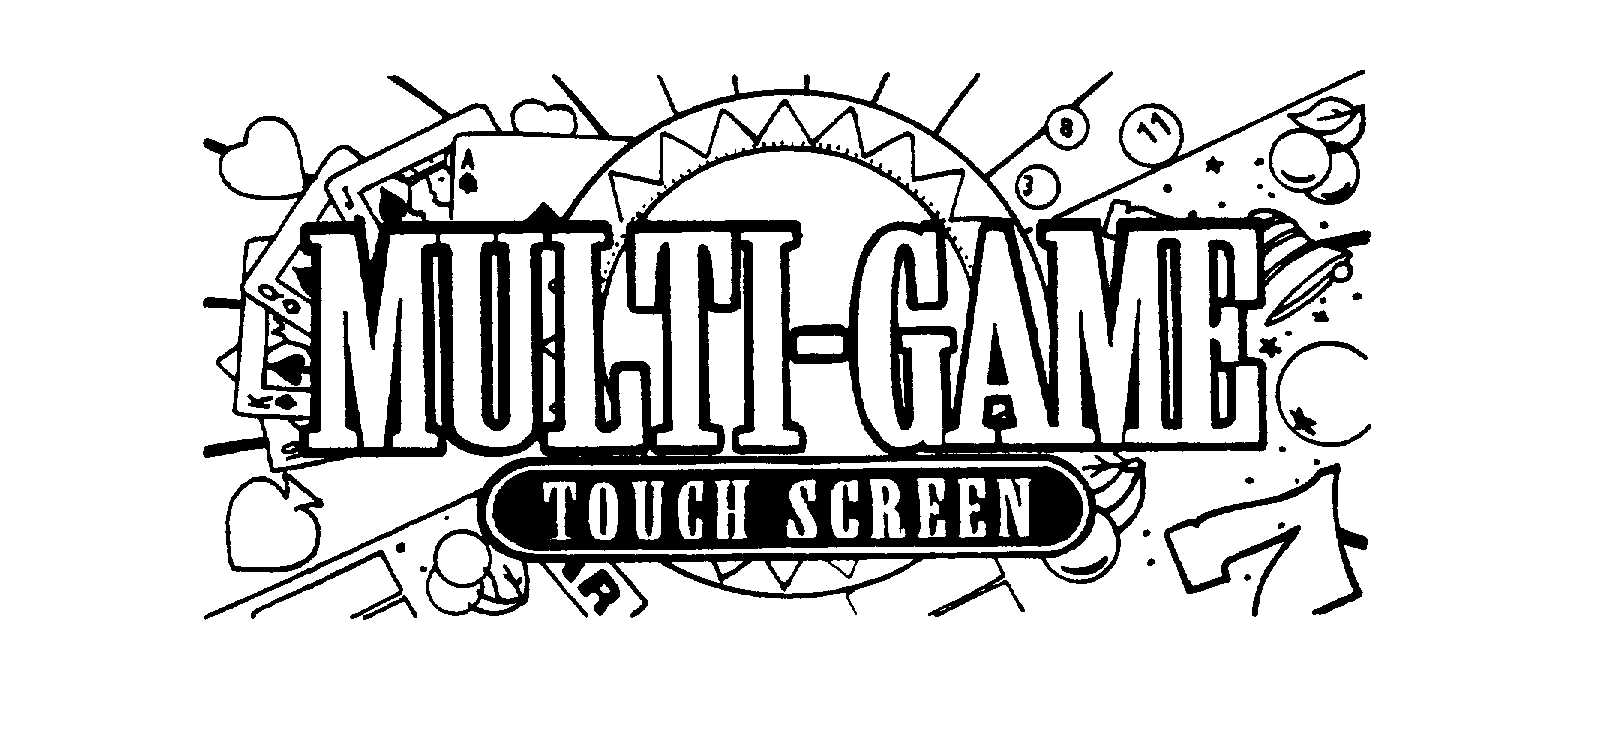  MULTI-GAME TOUCH SCREEN